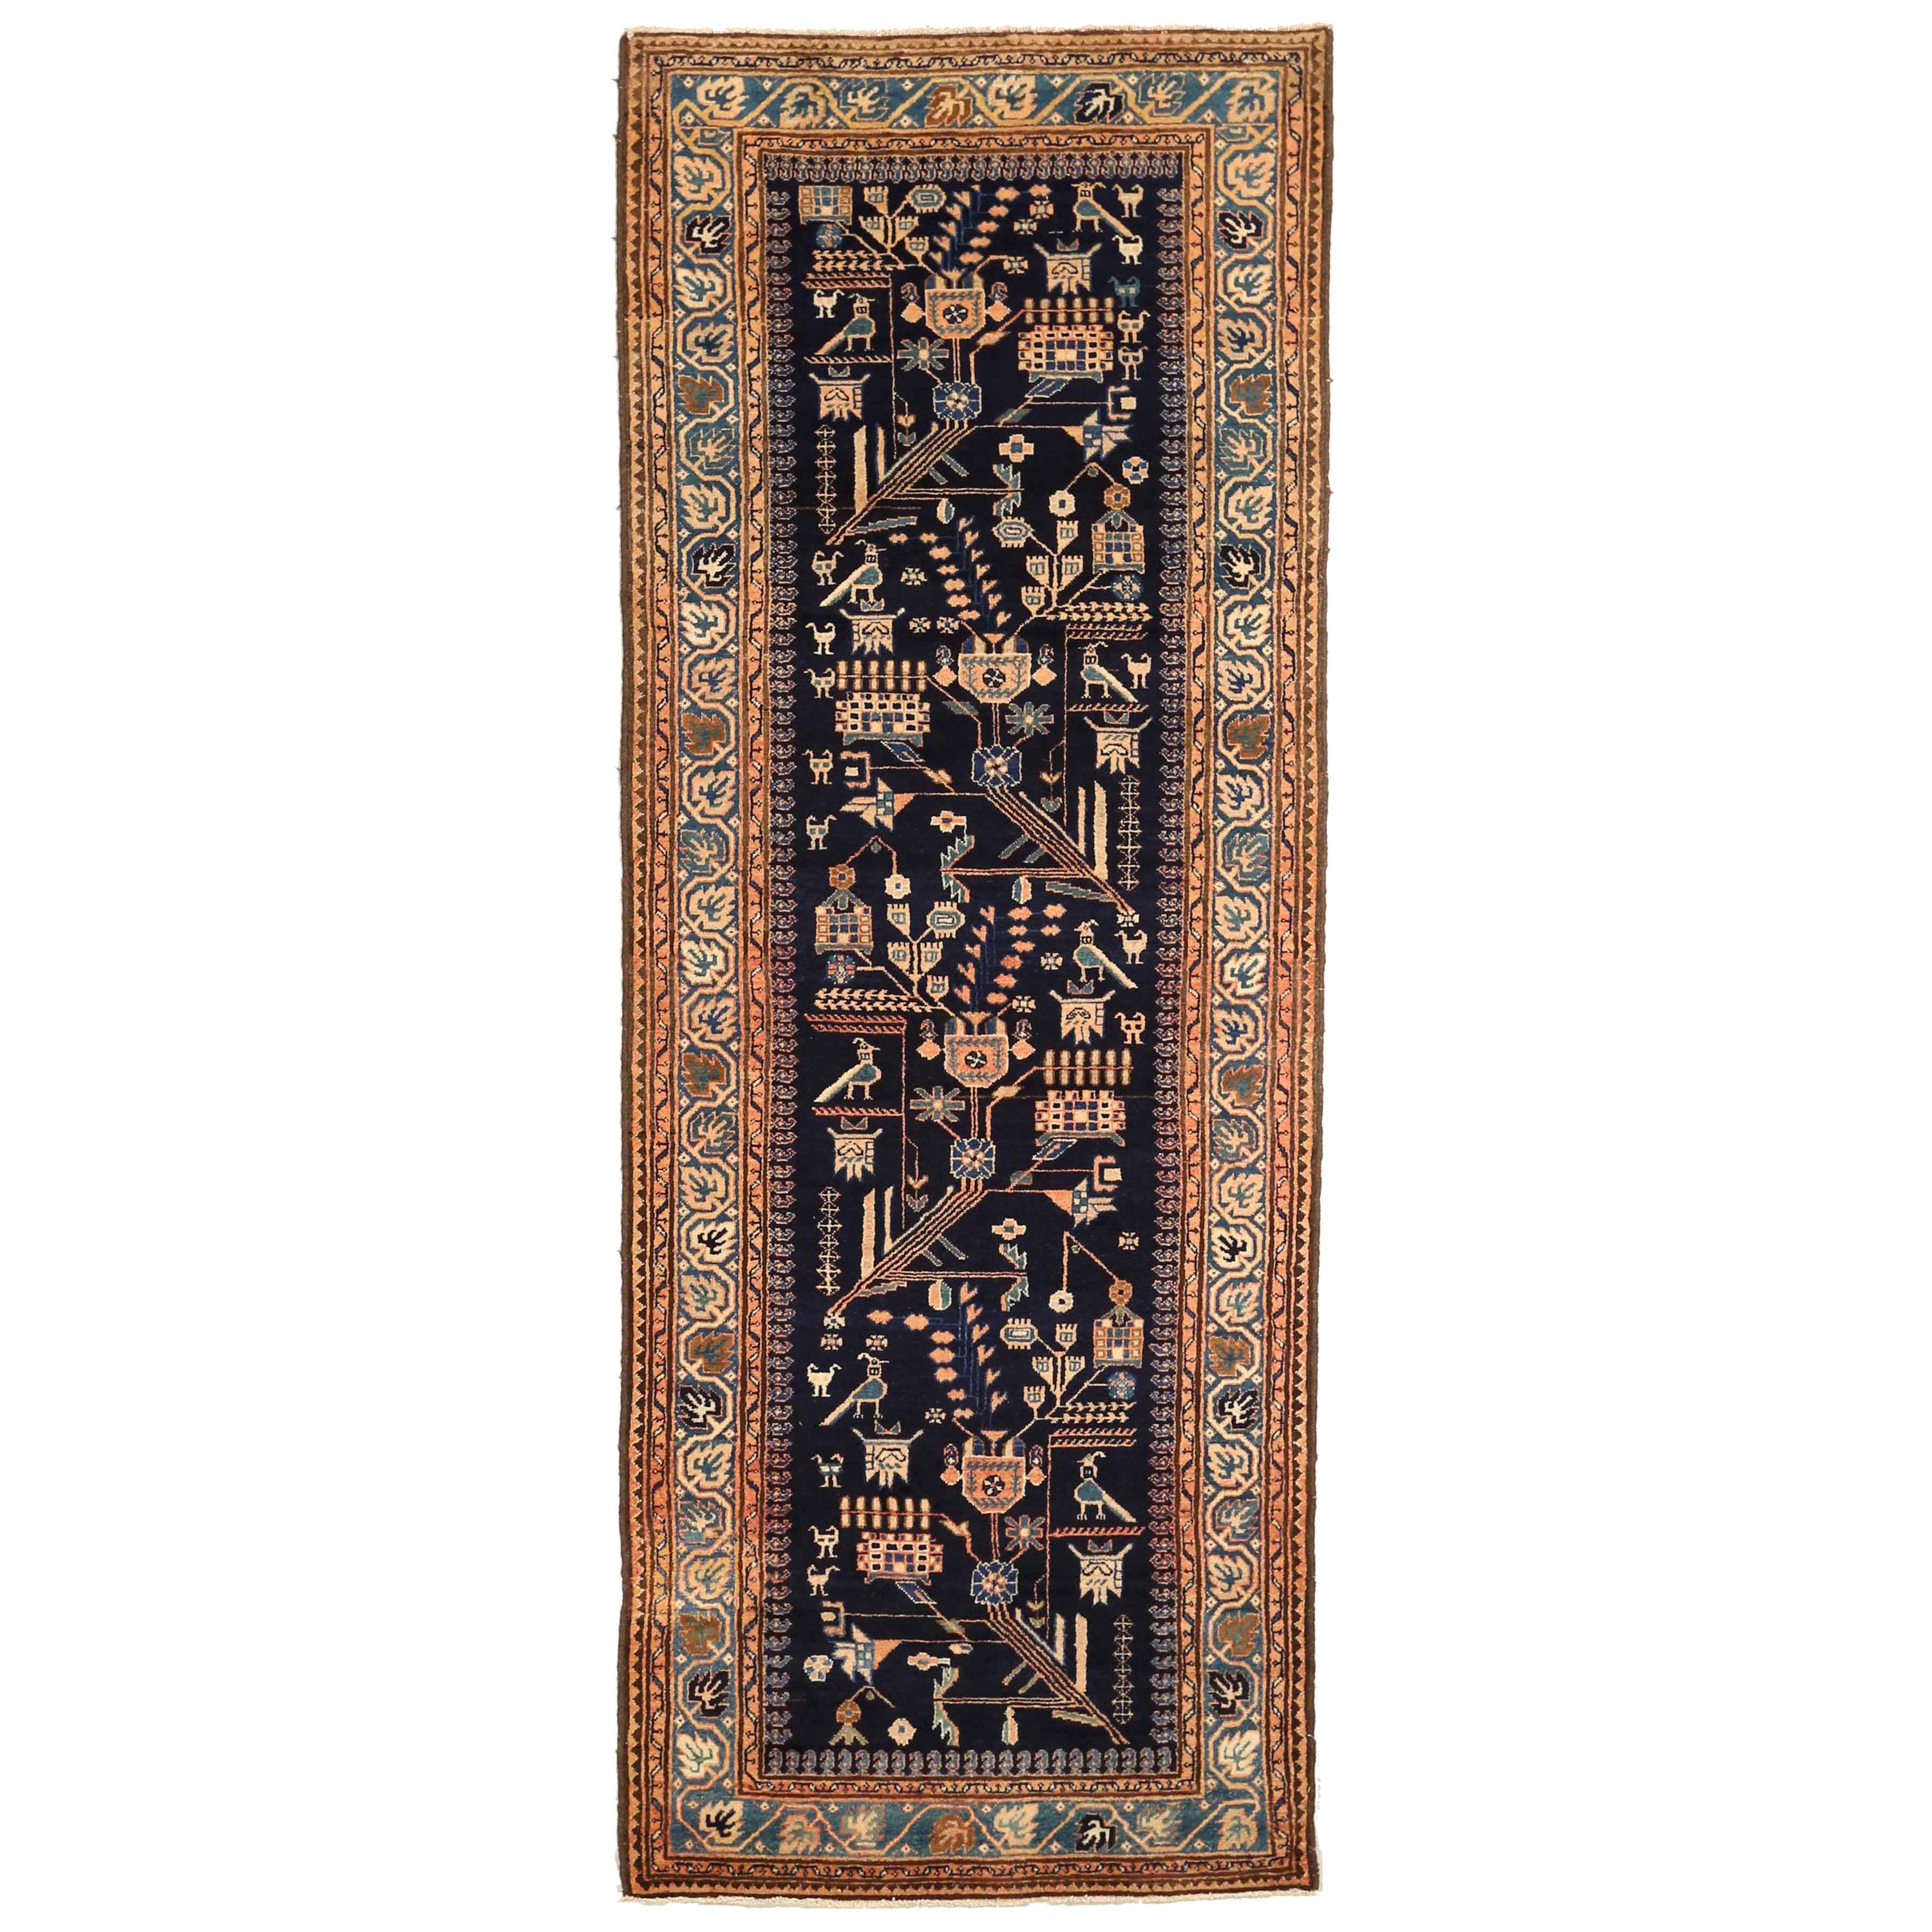 Antique Persian Malayer Runner Rug with Animal and Geometric Patterns